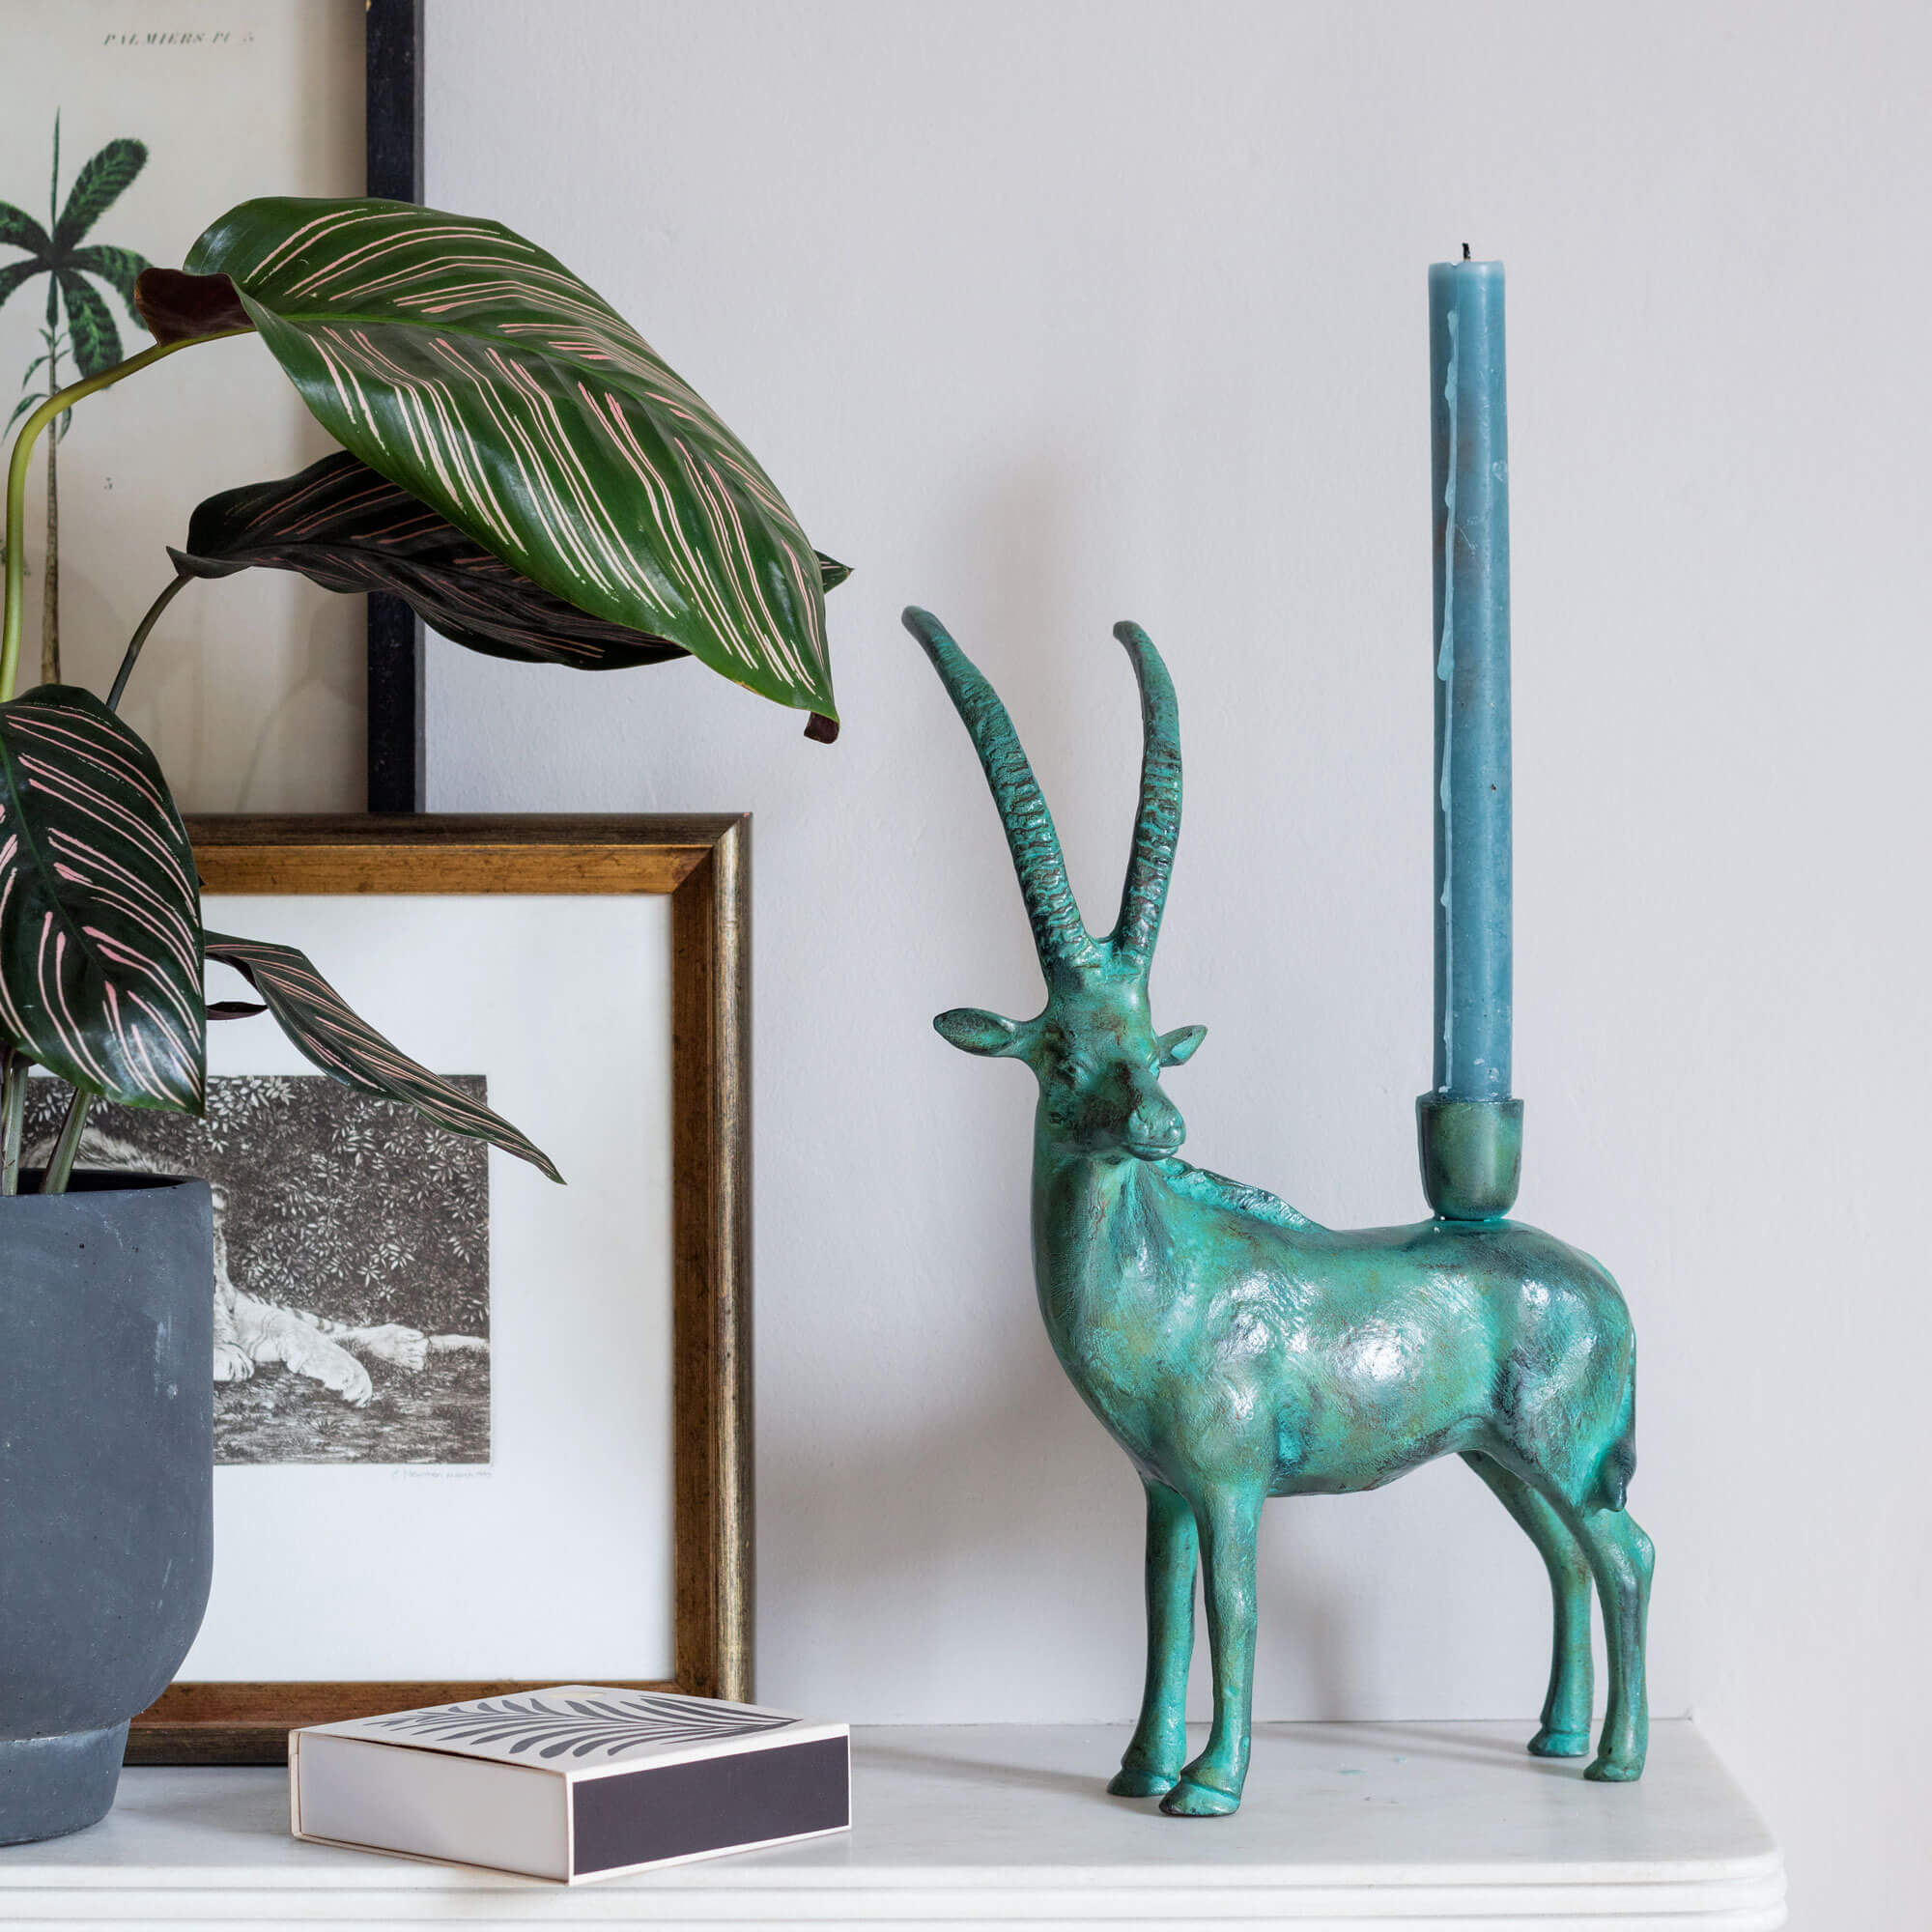 Read more about Graham and green ibex deer candle holder